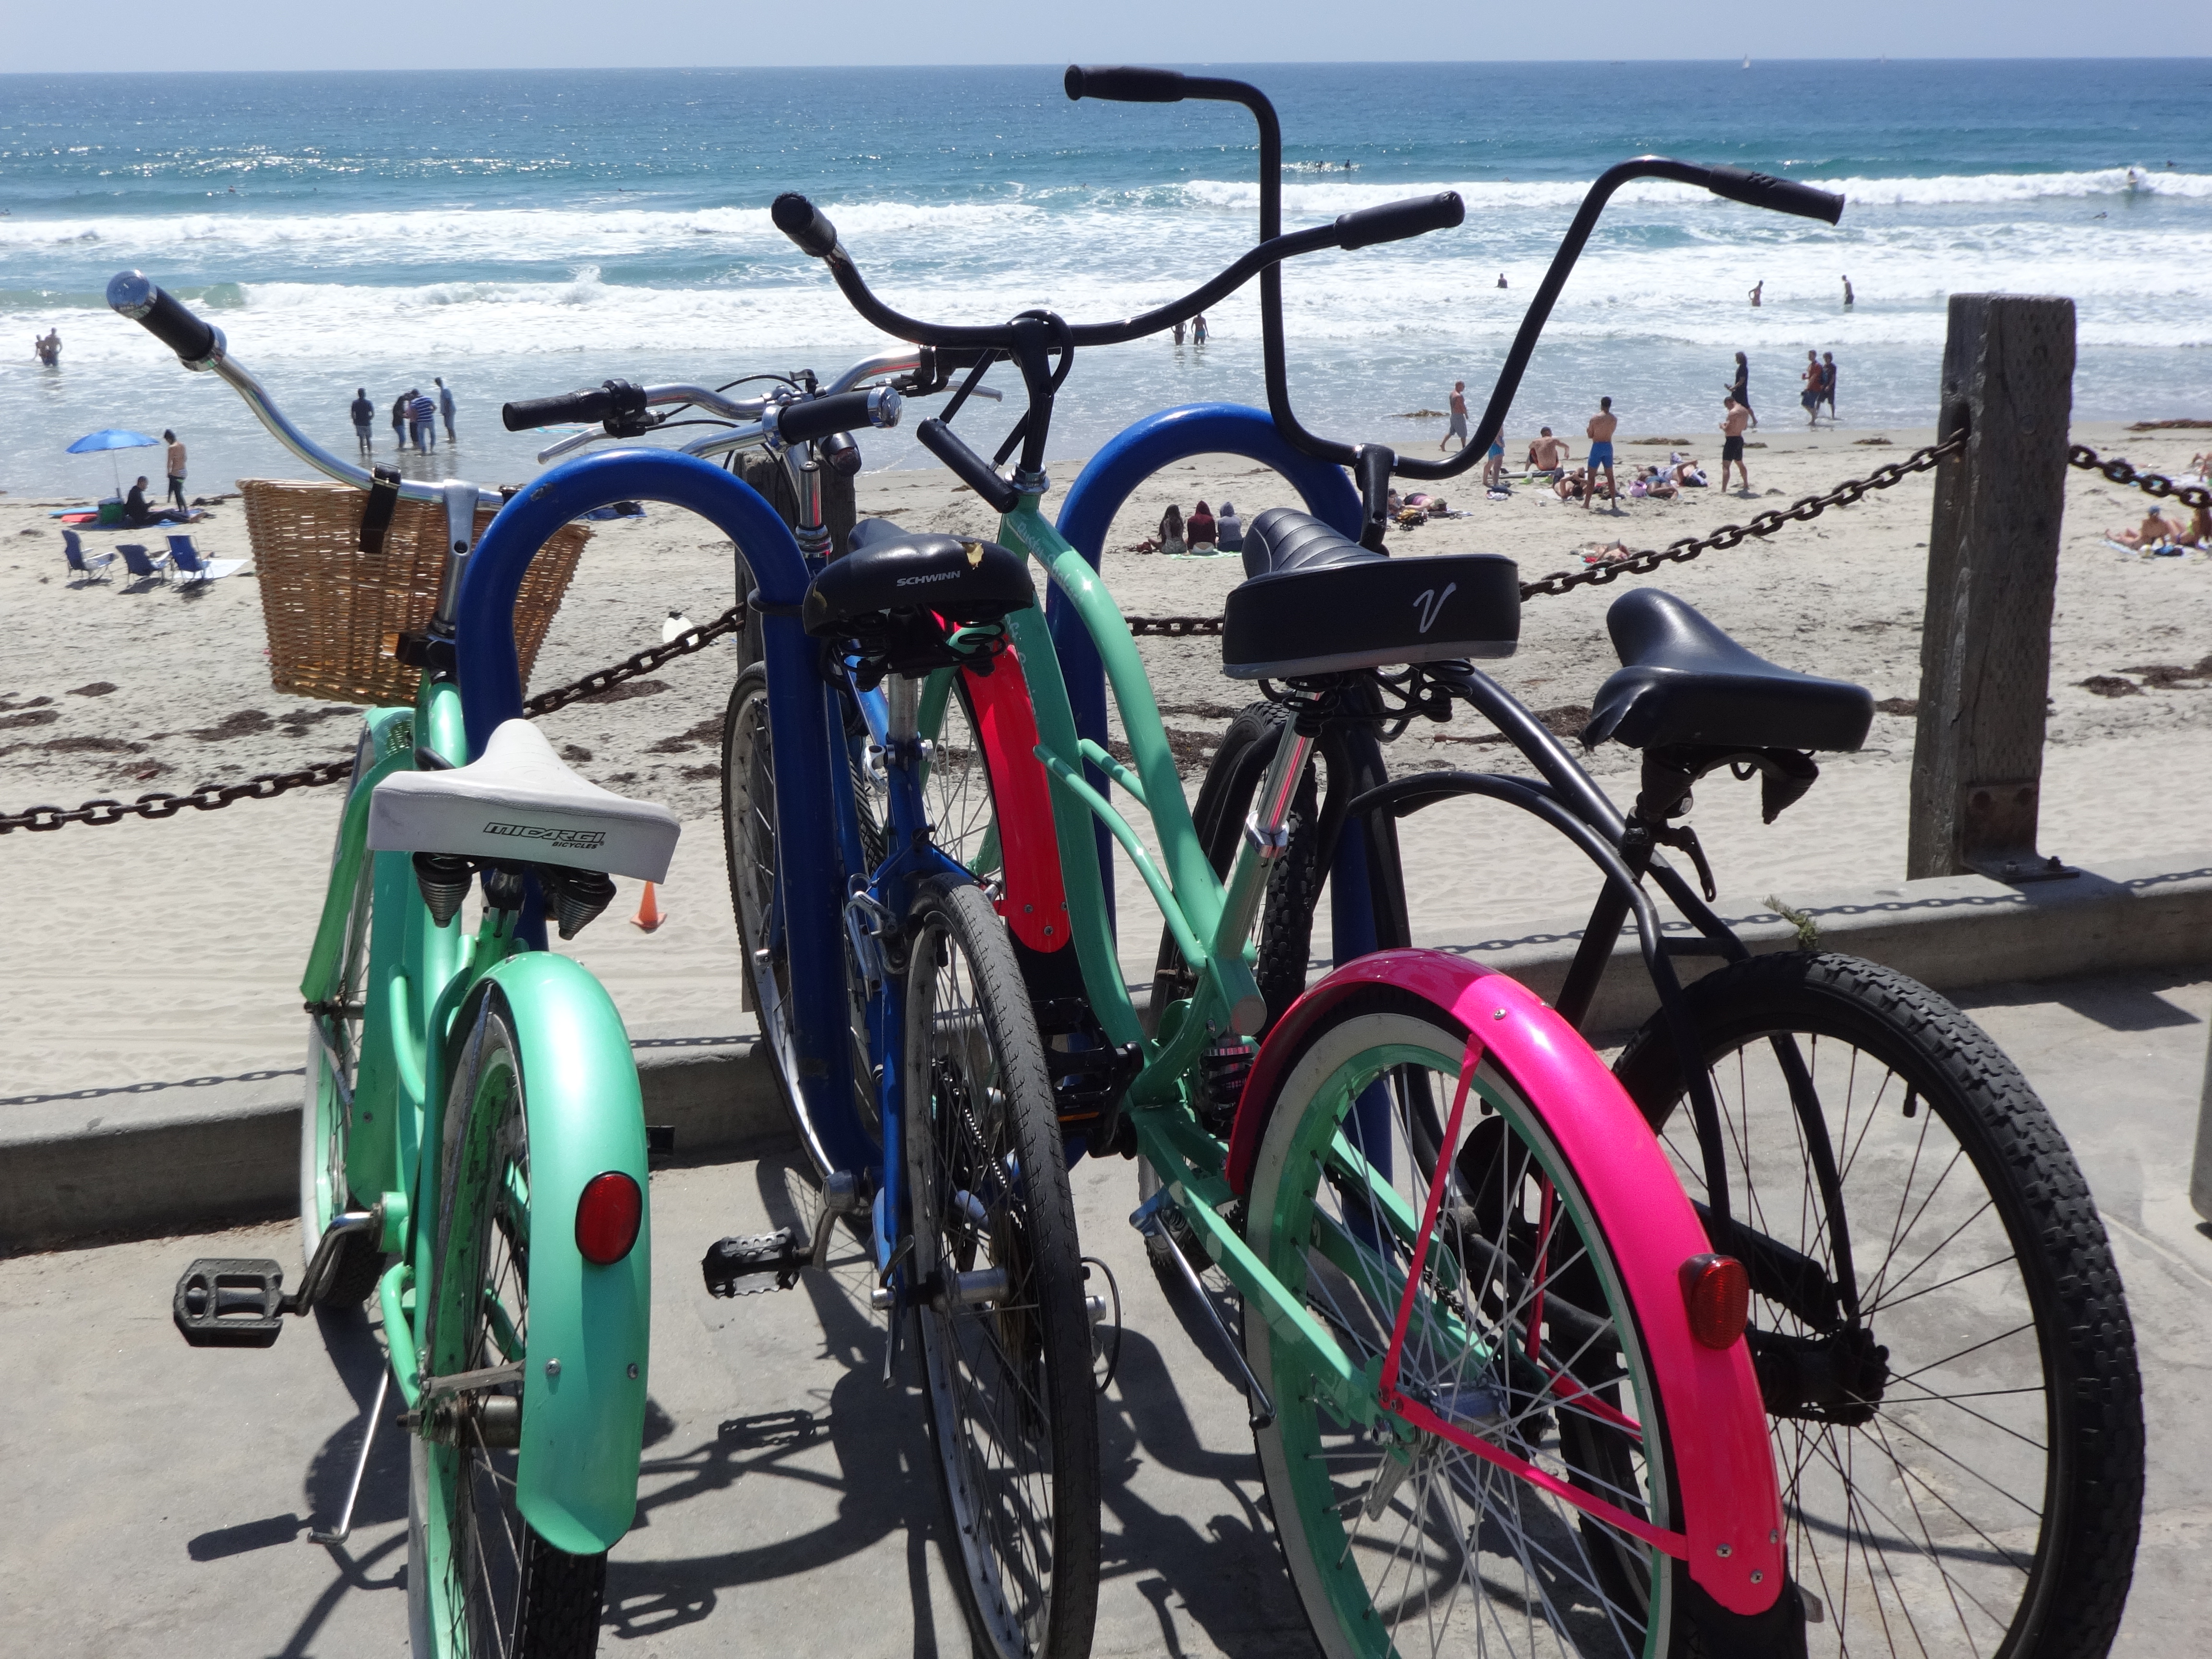 We spent our first day riding bikes around San Diego